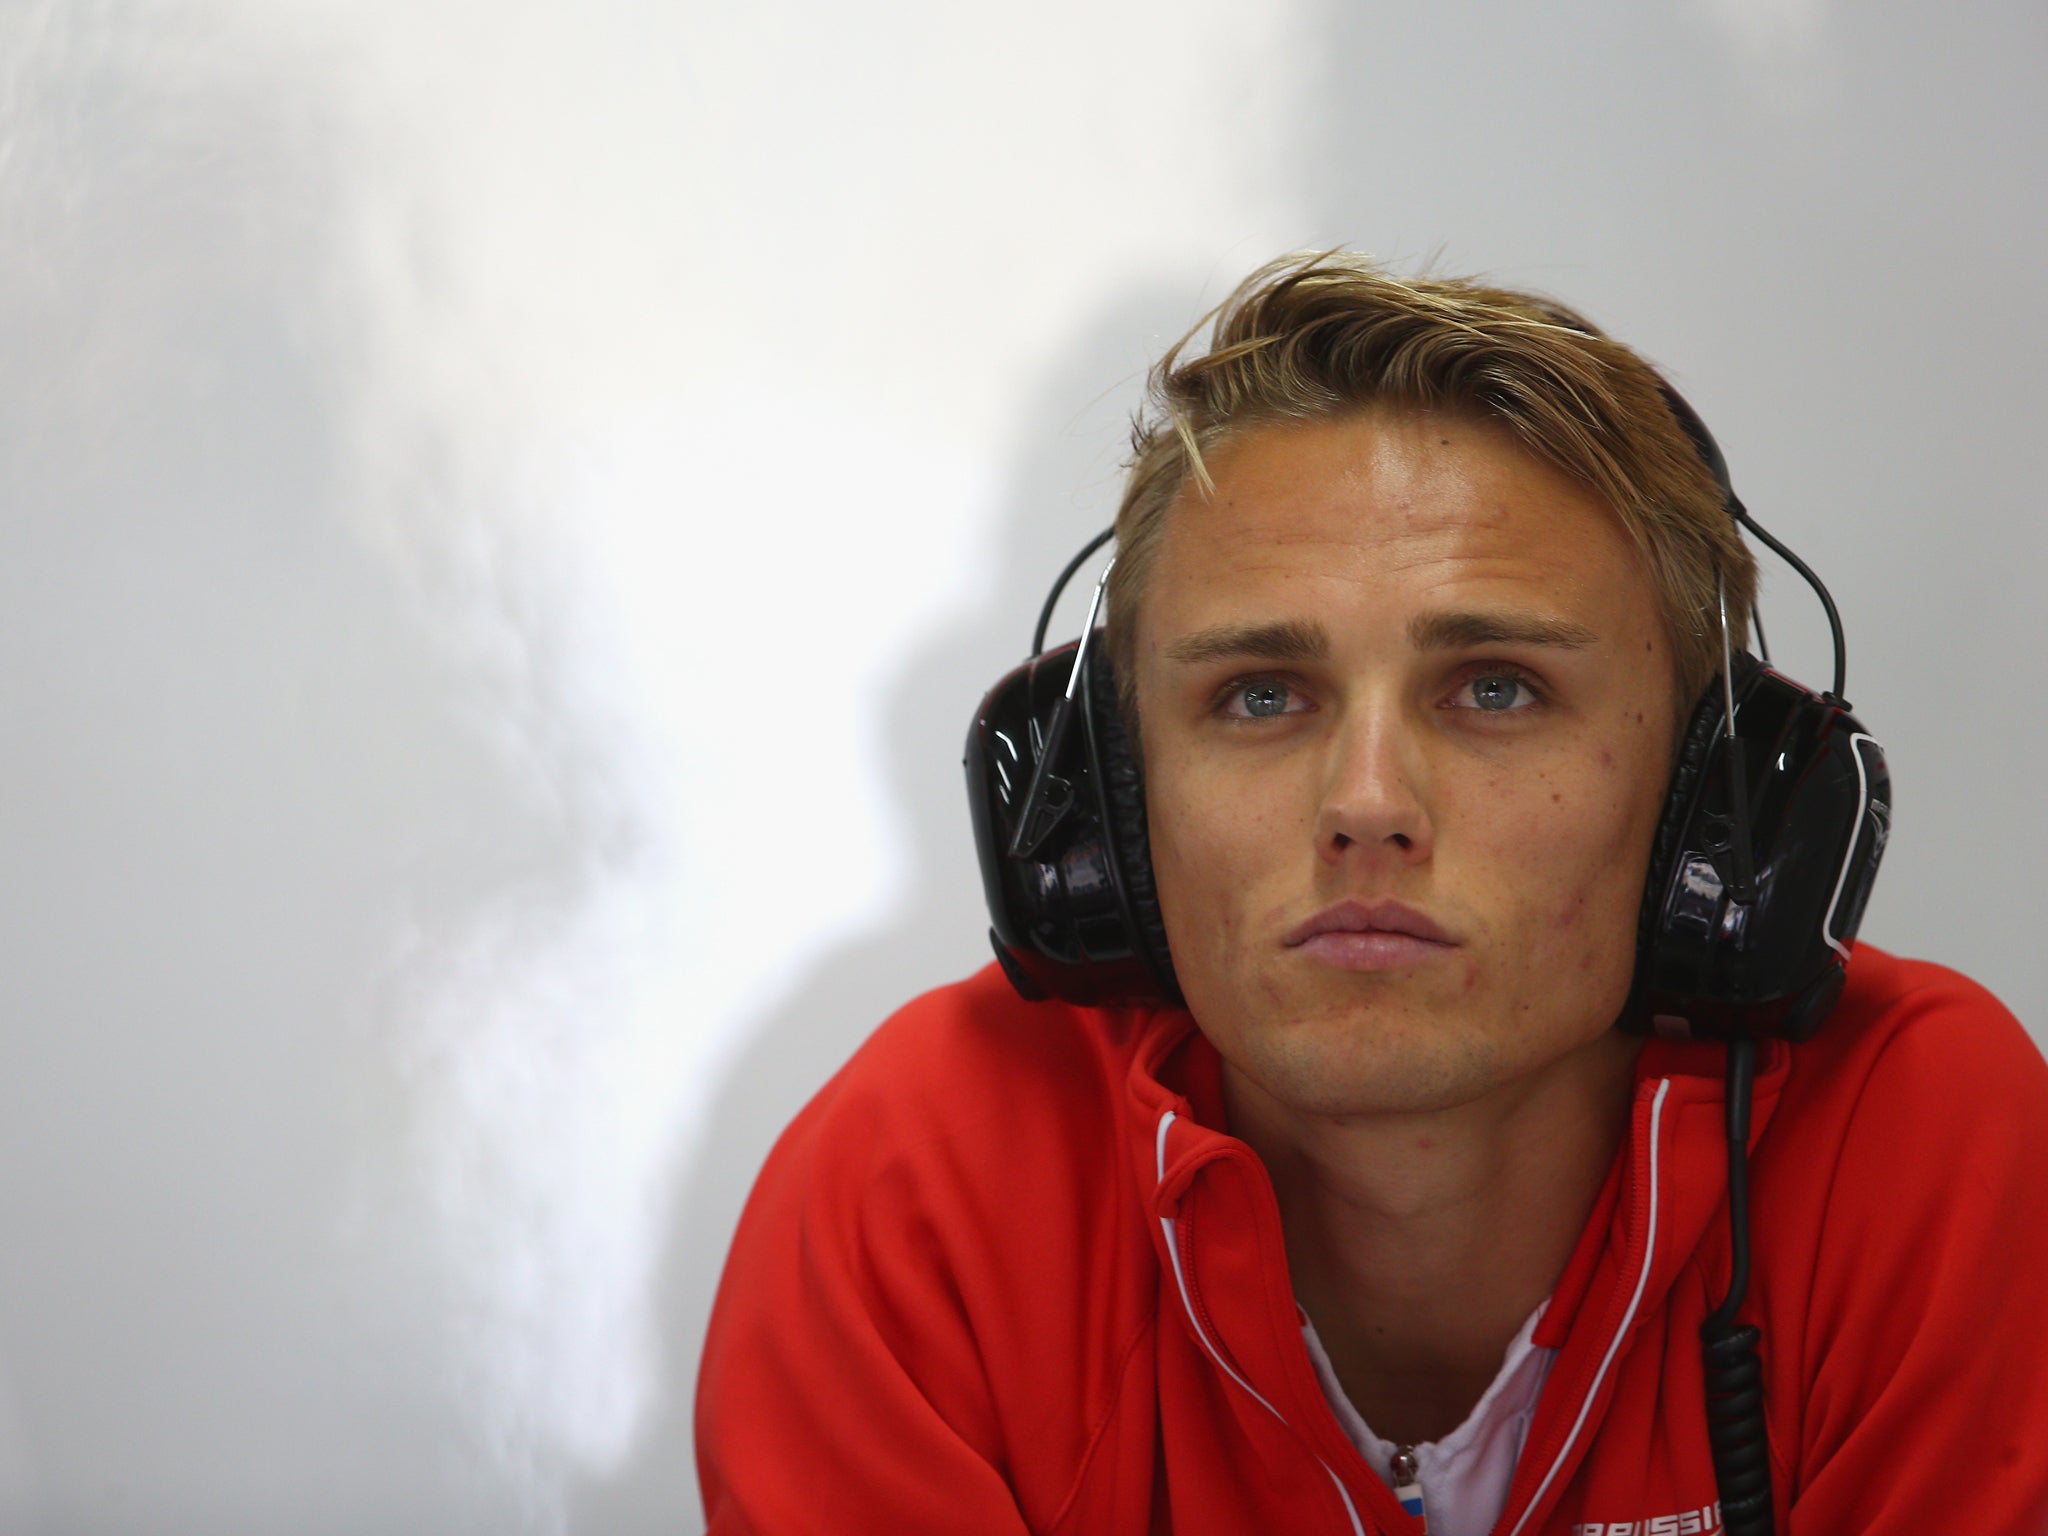 Max Chilton will remain with Marussia for the 2014 Formula One season